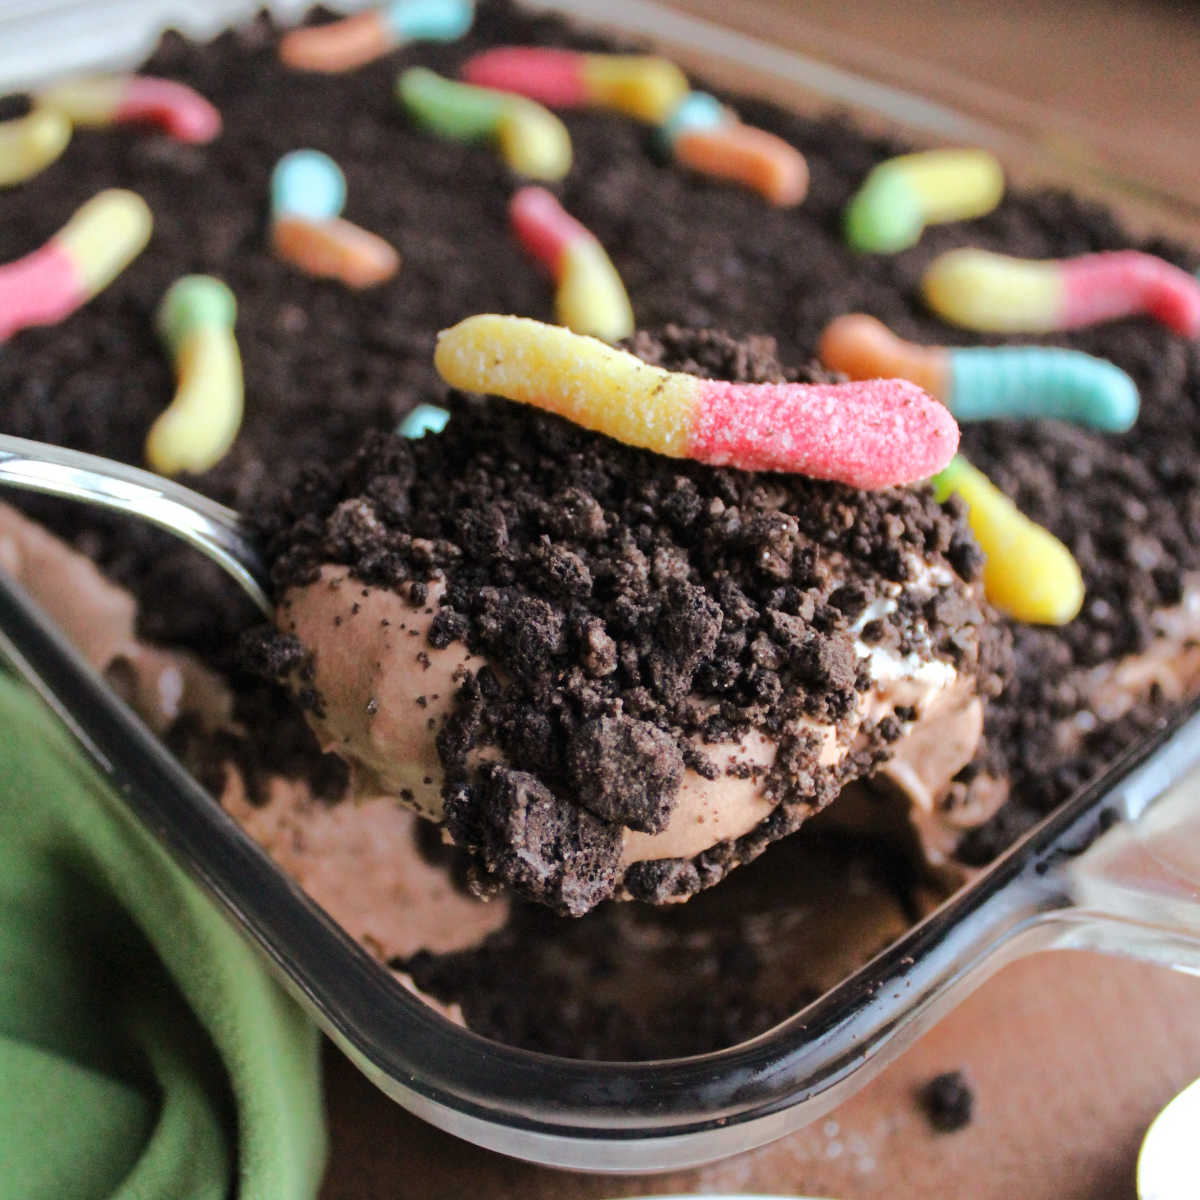 Serving spoon filled with dirt cake showing layers of Oreo crumbs, fluffy chocolate pudding mixture and sour gummy worms.